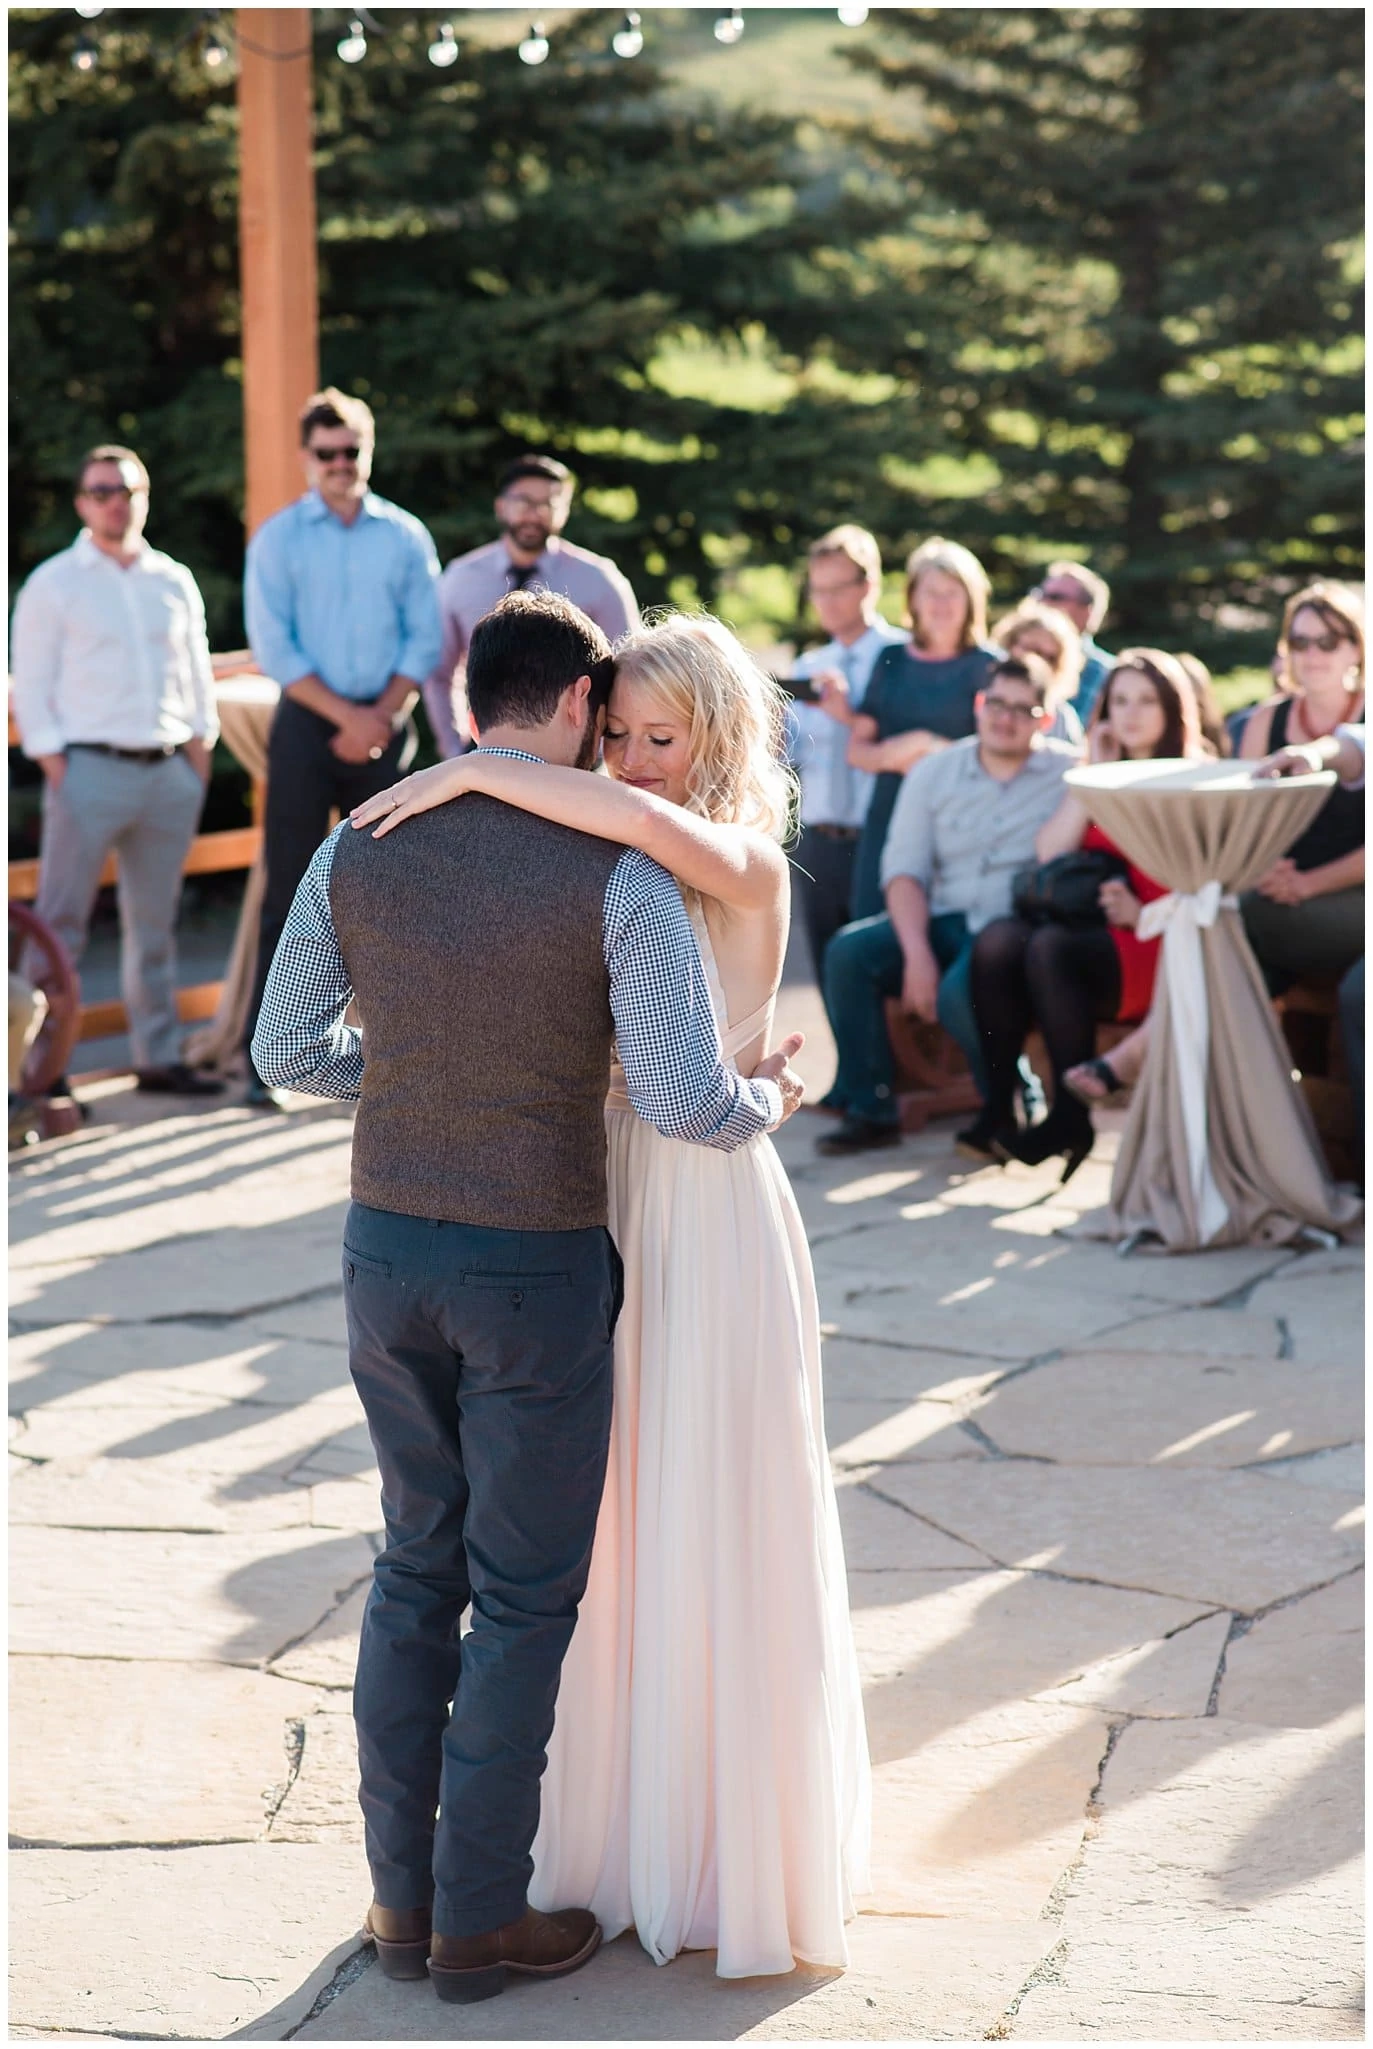 Romantic outdoor colorado first dance at Deer Creek Valley Ranch wedding by Boulder Wedding Photographer Jennie Crate Photographer